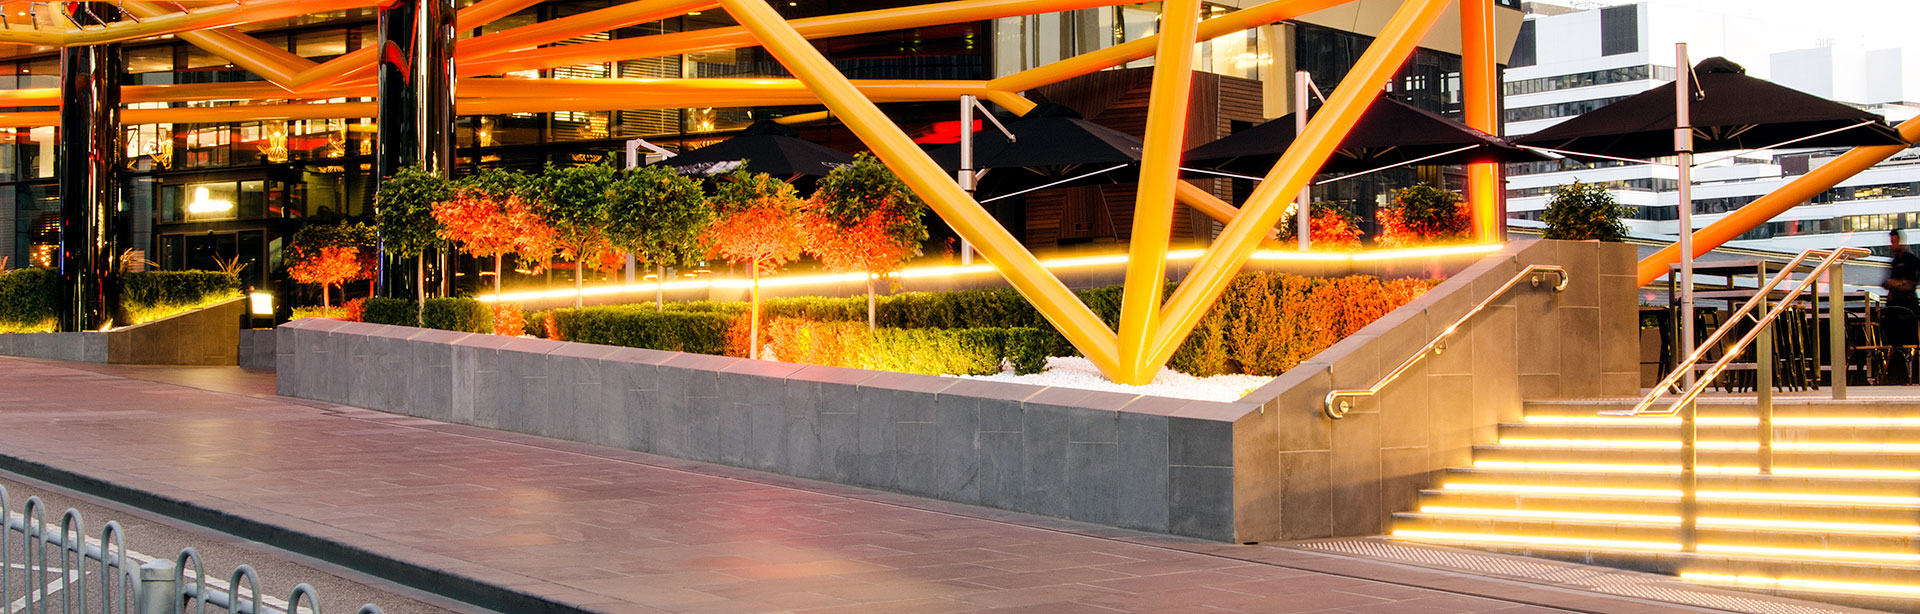 Collins Square is home to many cafes, restaurants, fashion, grocery and specialty retailers. Many pedestrians pass daily through the forecourt and relaxed alfresco area, part of the retail mix at Collins Square.